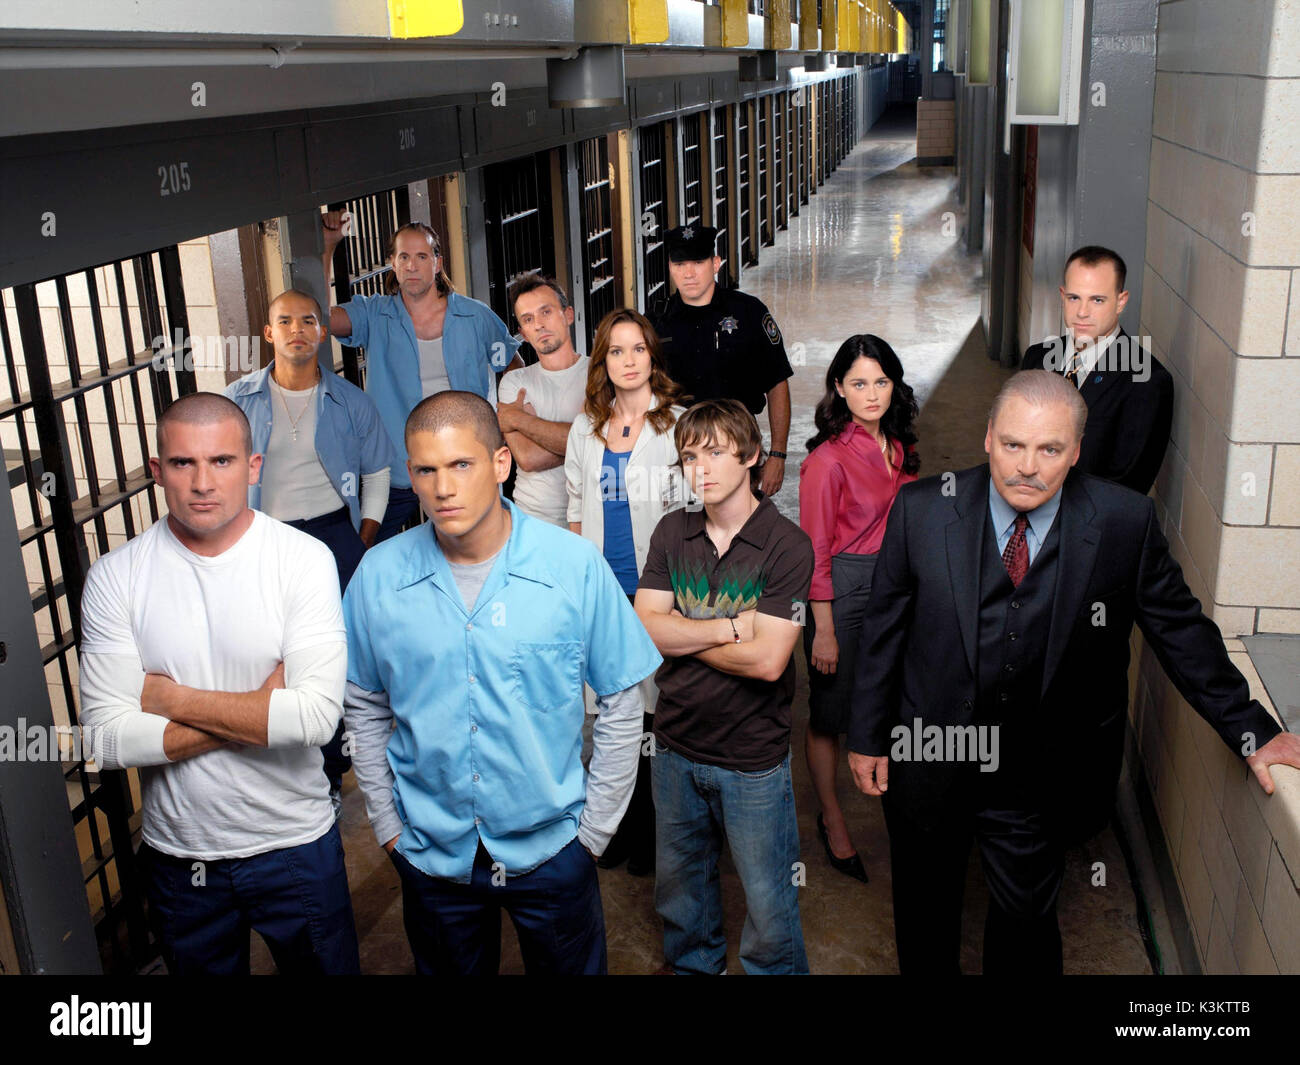 PRISON BREAK Front row, L-R: Dominic Purcell, Wentworth Miller, Marshall Allman, Robin Tunney, Stacy Keach. Back row, L-R: Amaury Nolasco, Peter Stormare, Robert Knepper, Sarah Wayne Callies, Wade Williams, Paul Adelstein.        Date: 2005 Stock Photo